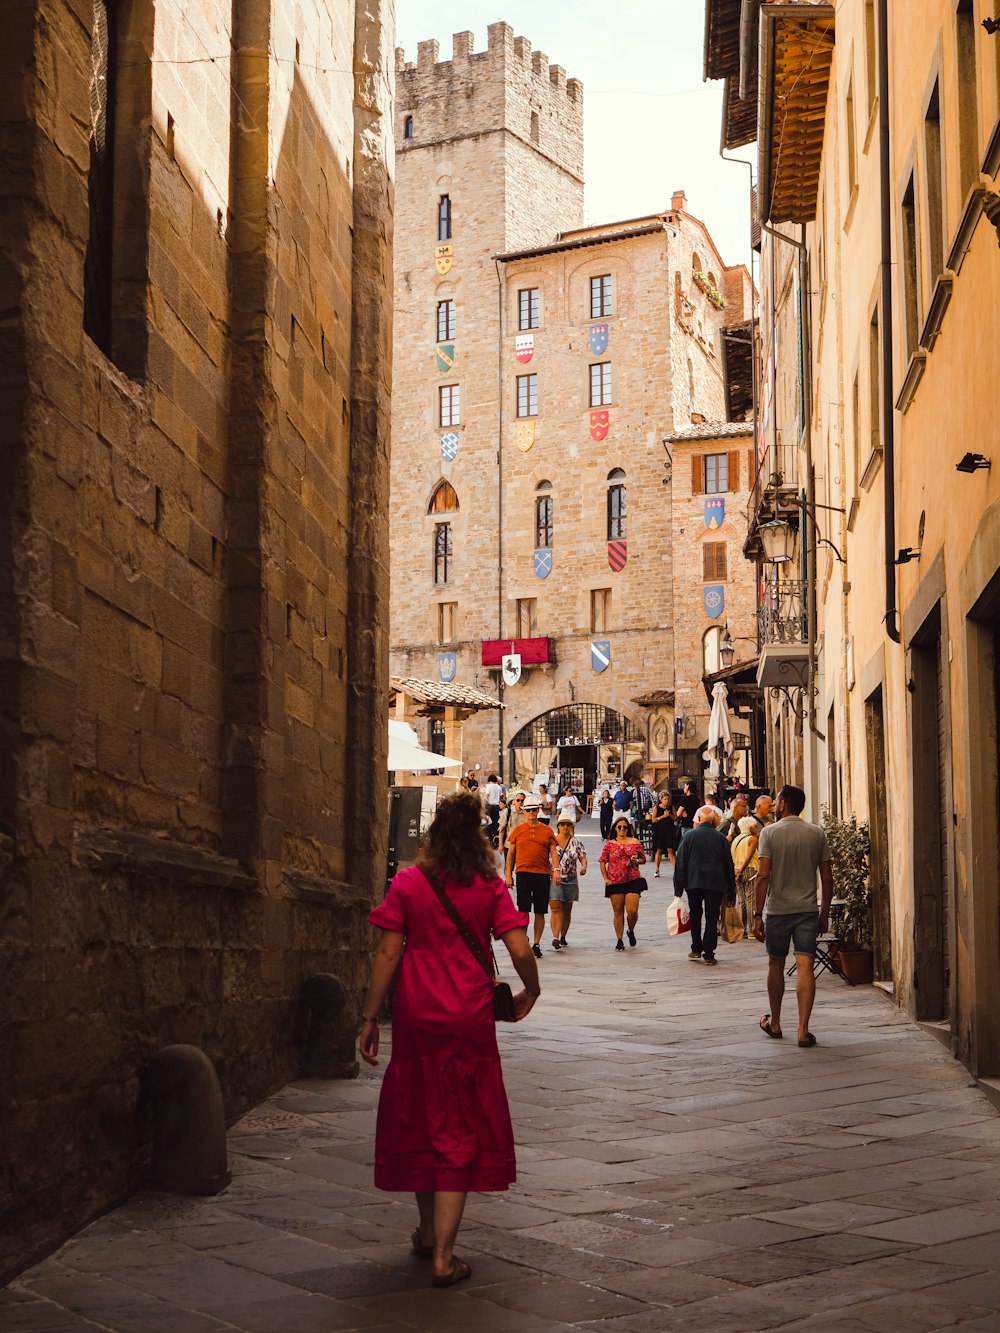 a person in a red dress walking down a street between buildings